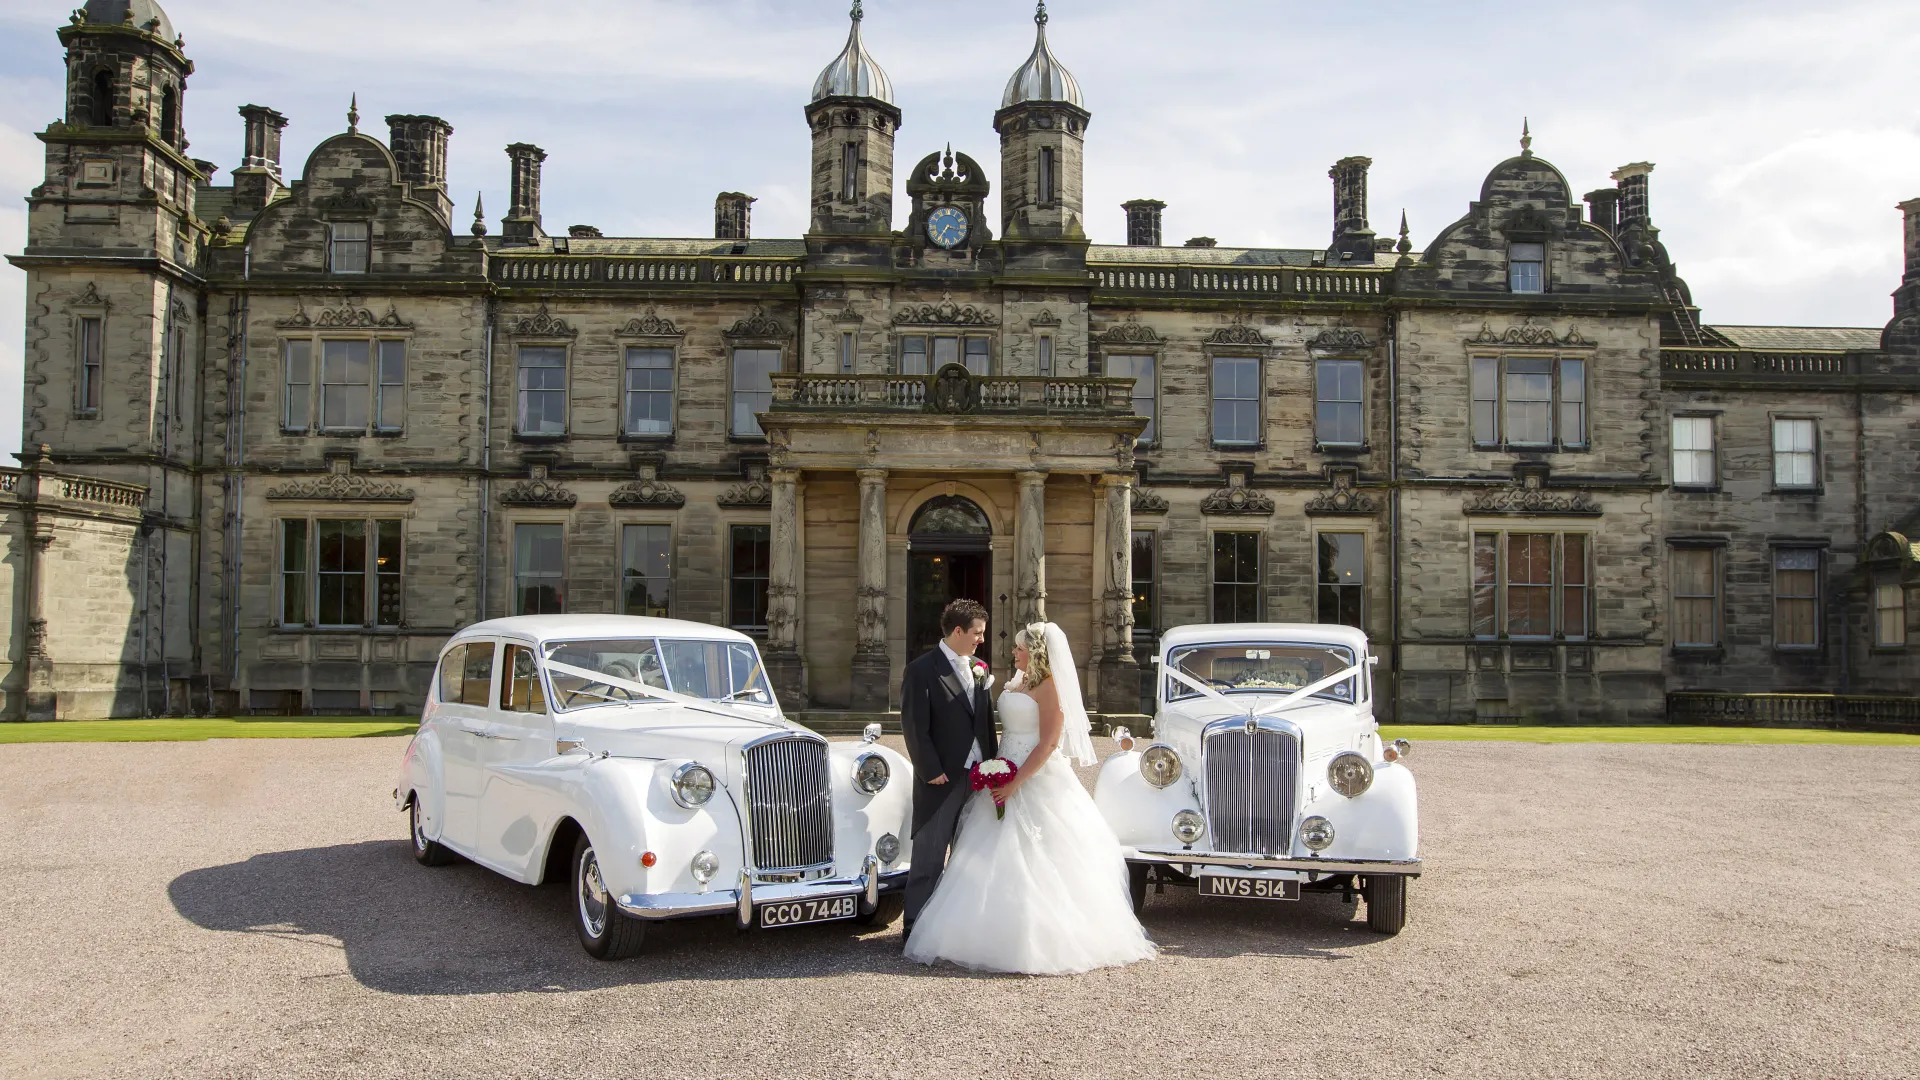 Pair of Classic Austin Princess Limousine with Bride and Groom posing for Photos between the two vehicles. Background is a castle wedding venue